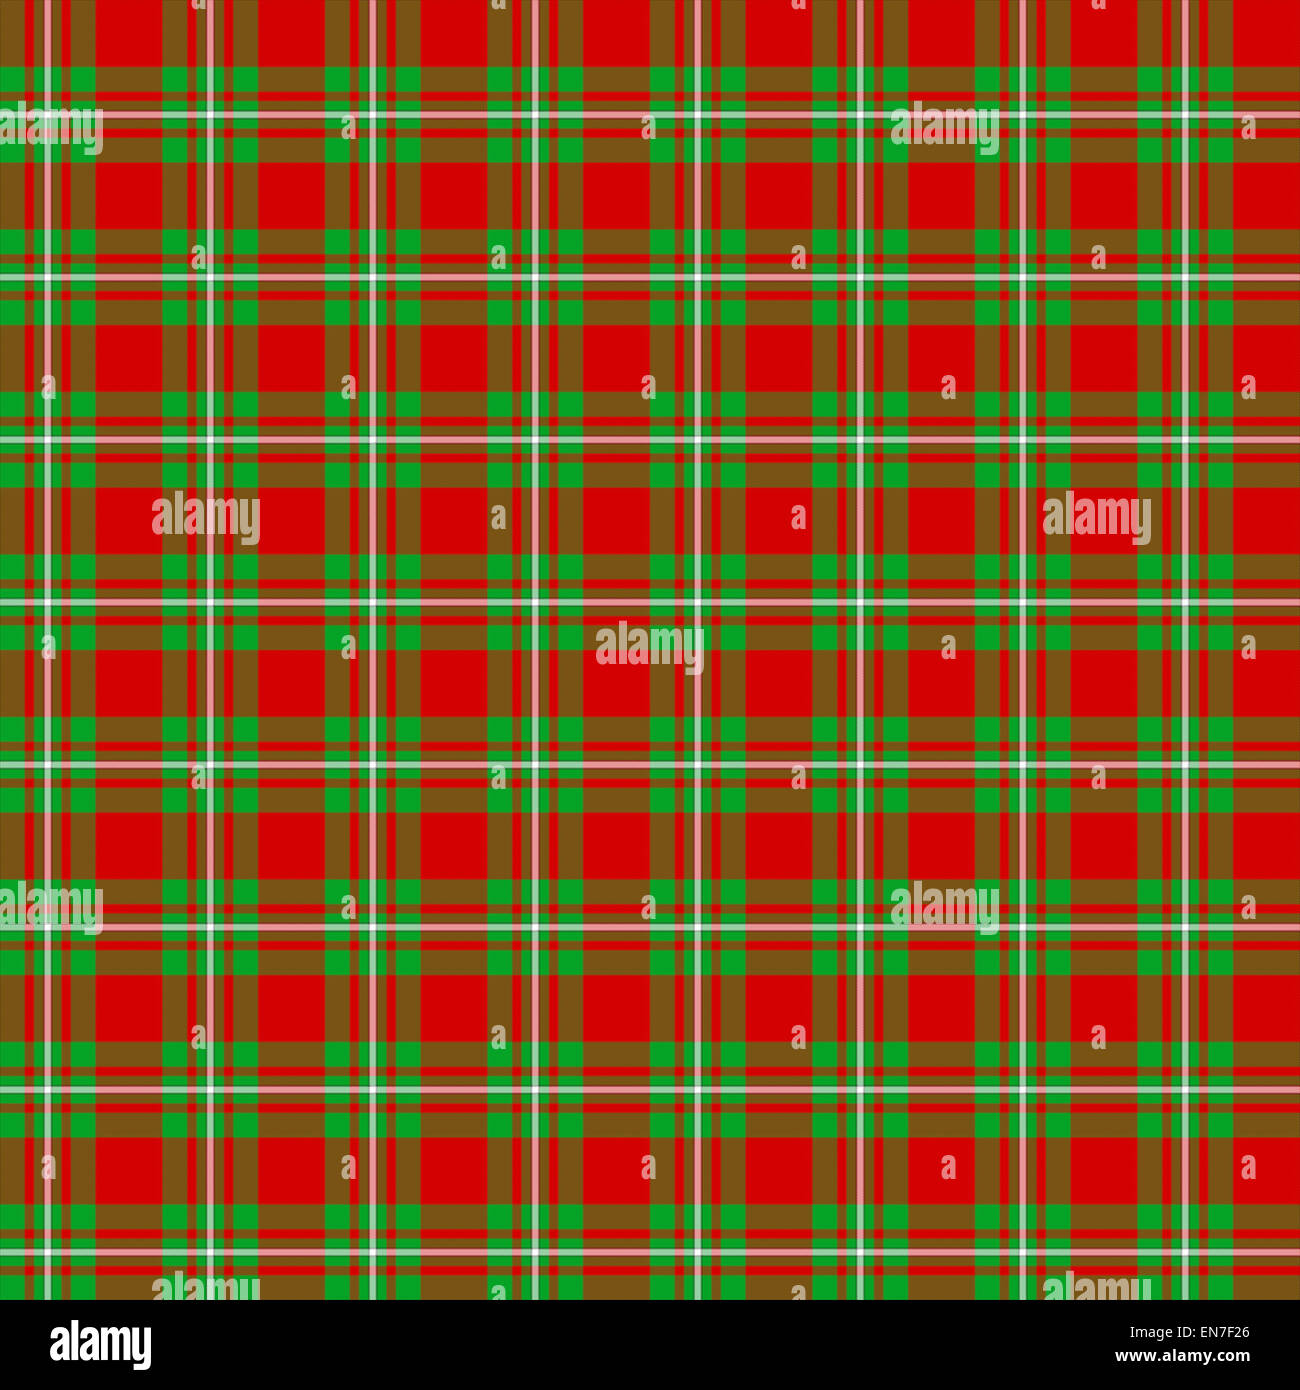 A seamless patterned tile of the clan MacGregor tartan. Stock Photo